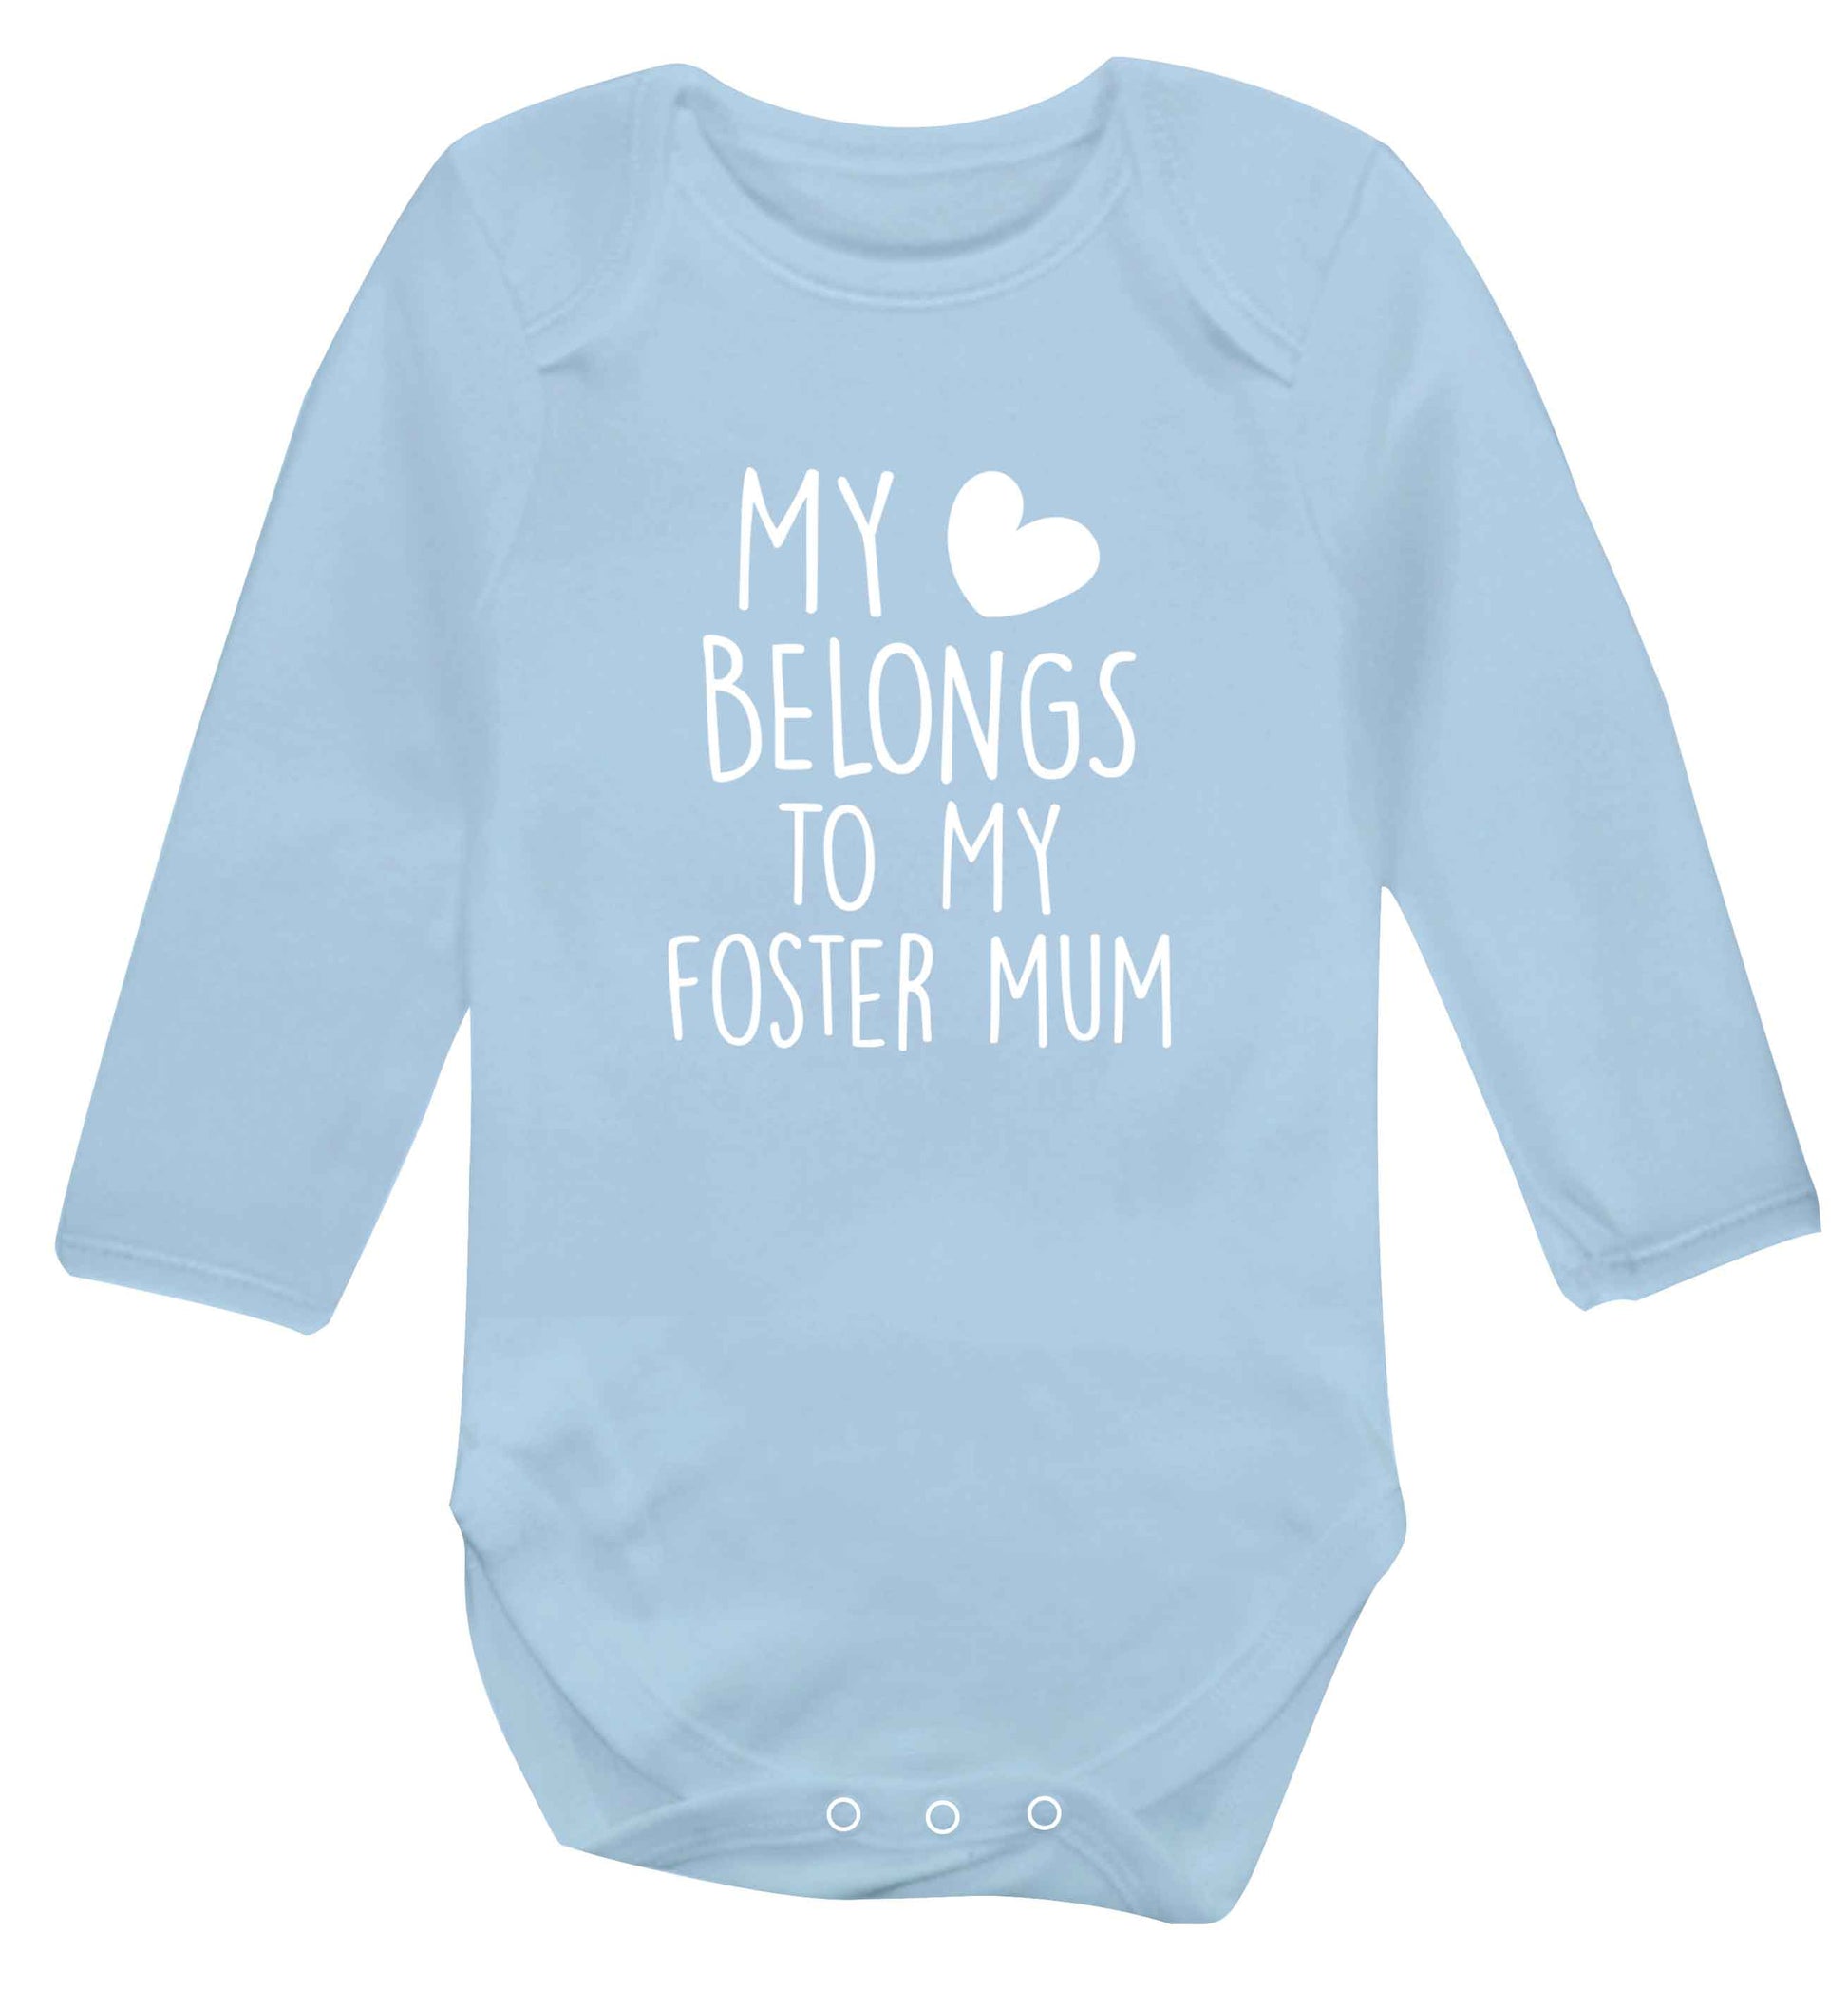 My heart belongs to my foster mum baby vest long sleeved pale blue 6-12 months